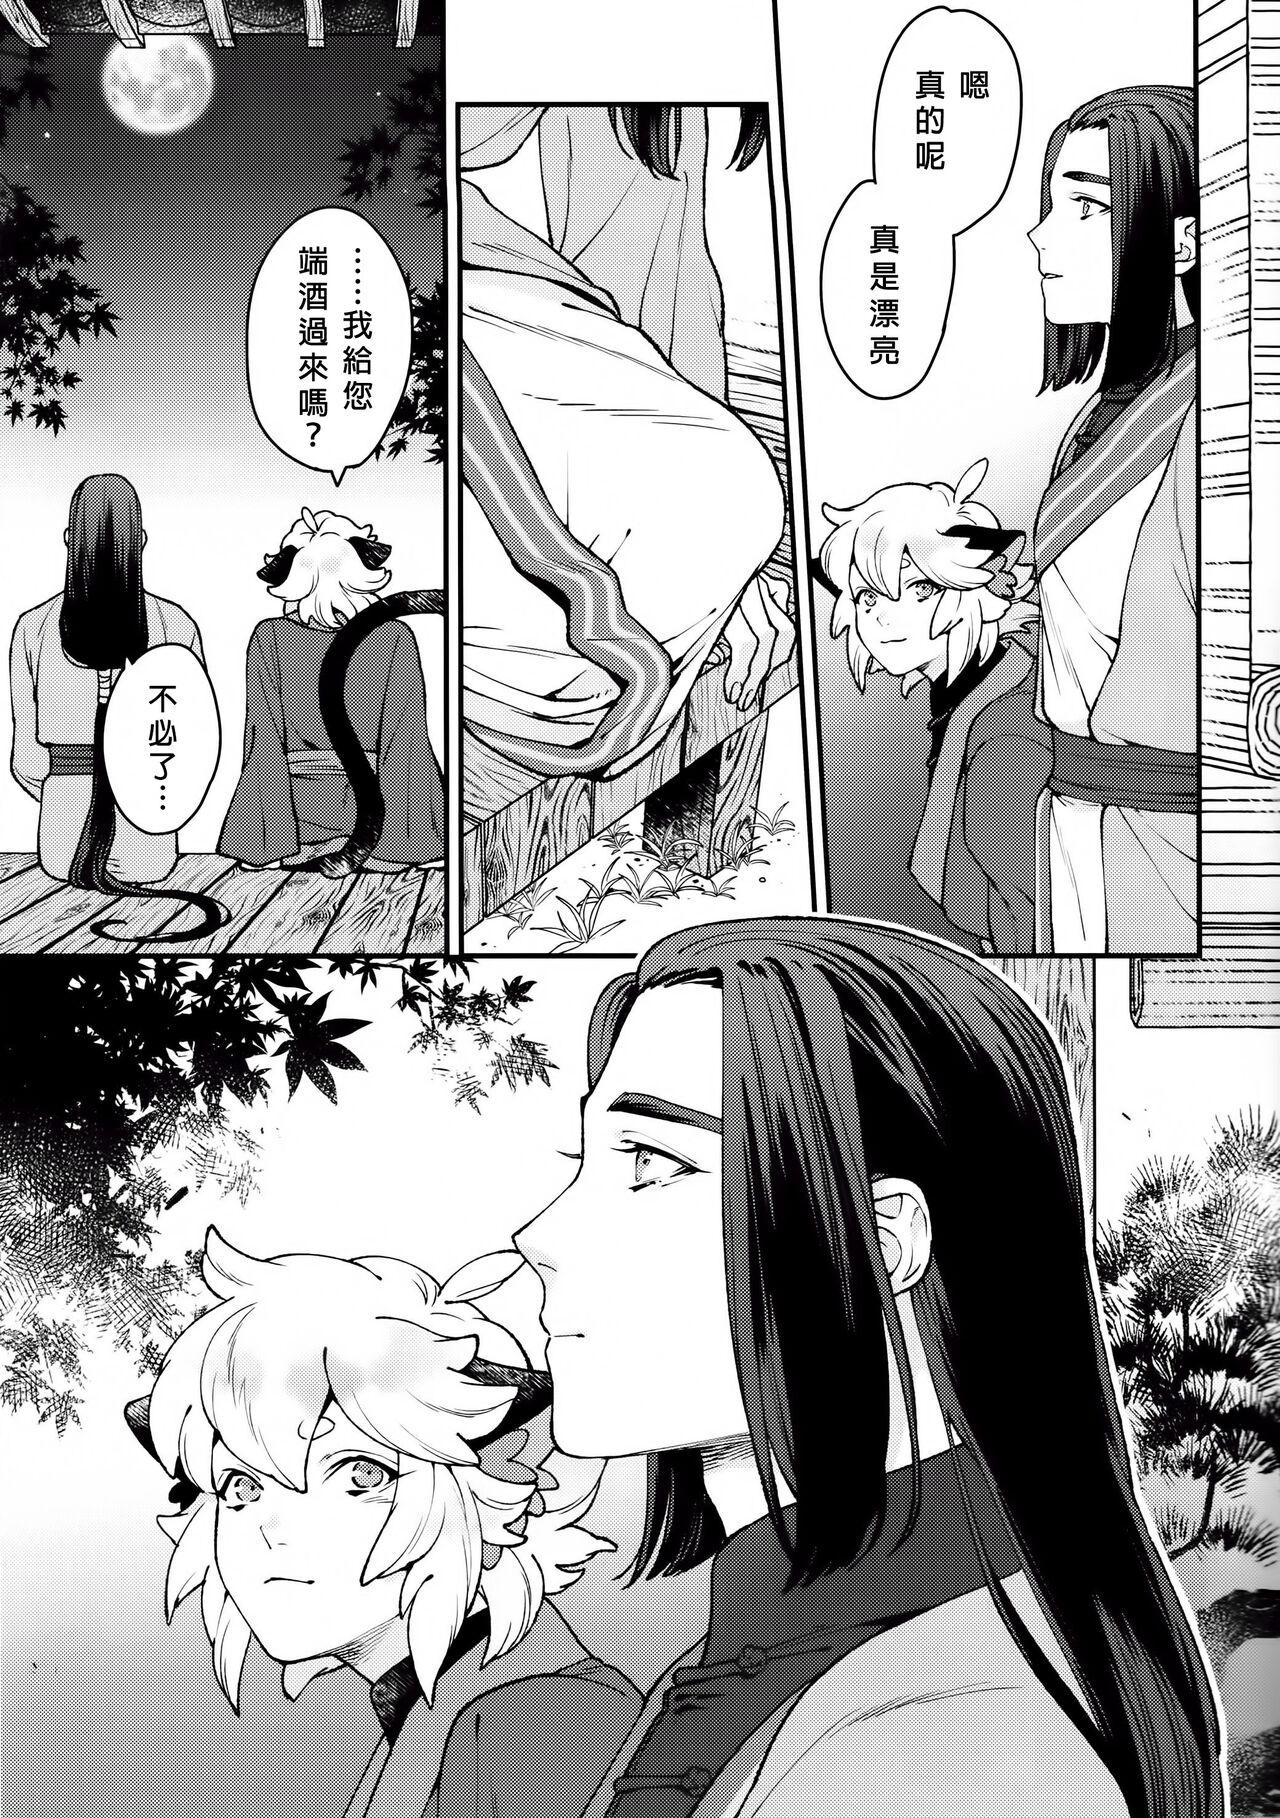 Lesbian When the Hoar-frost falls|霜降之时 - The legend of luo xiaohei Gay Hardcore - Page 4